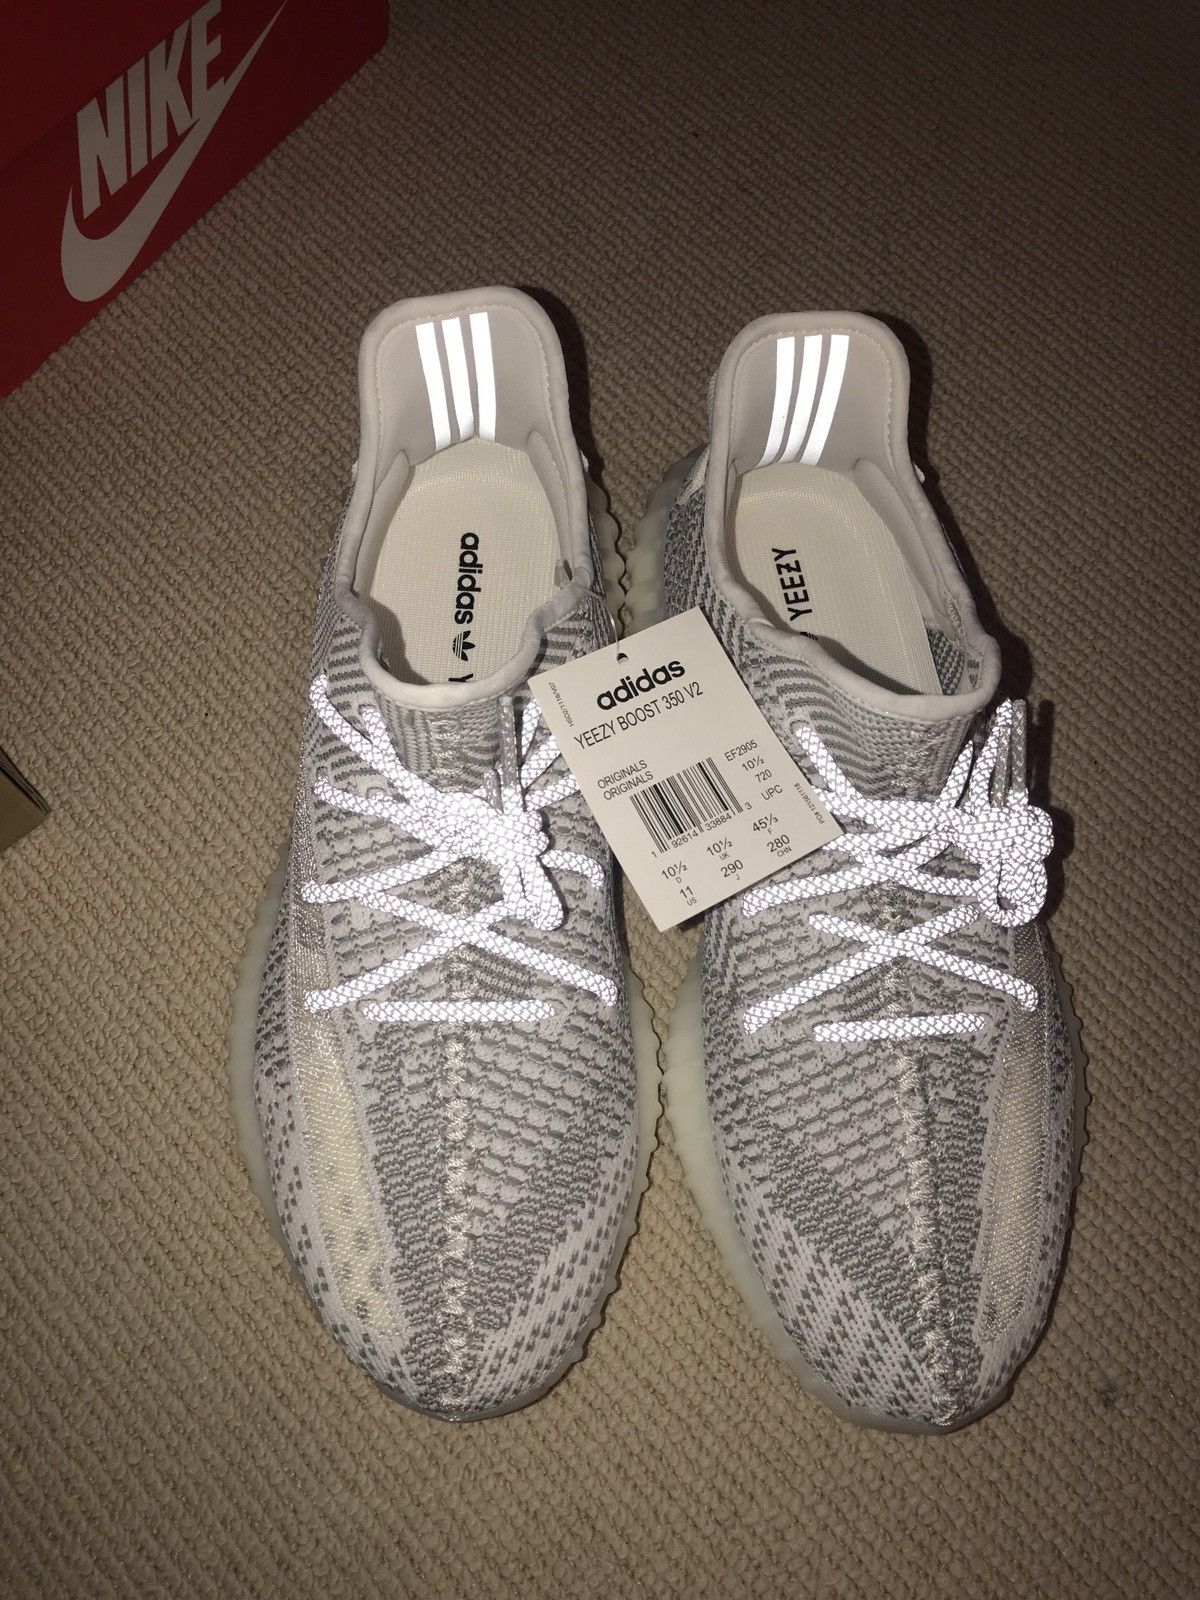 great prices Yeezy Boost 350 V2 Static Non-Reflective | www ...